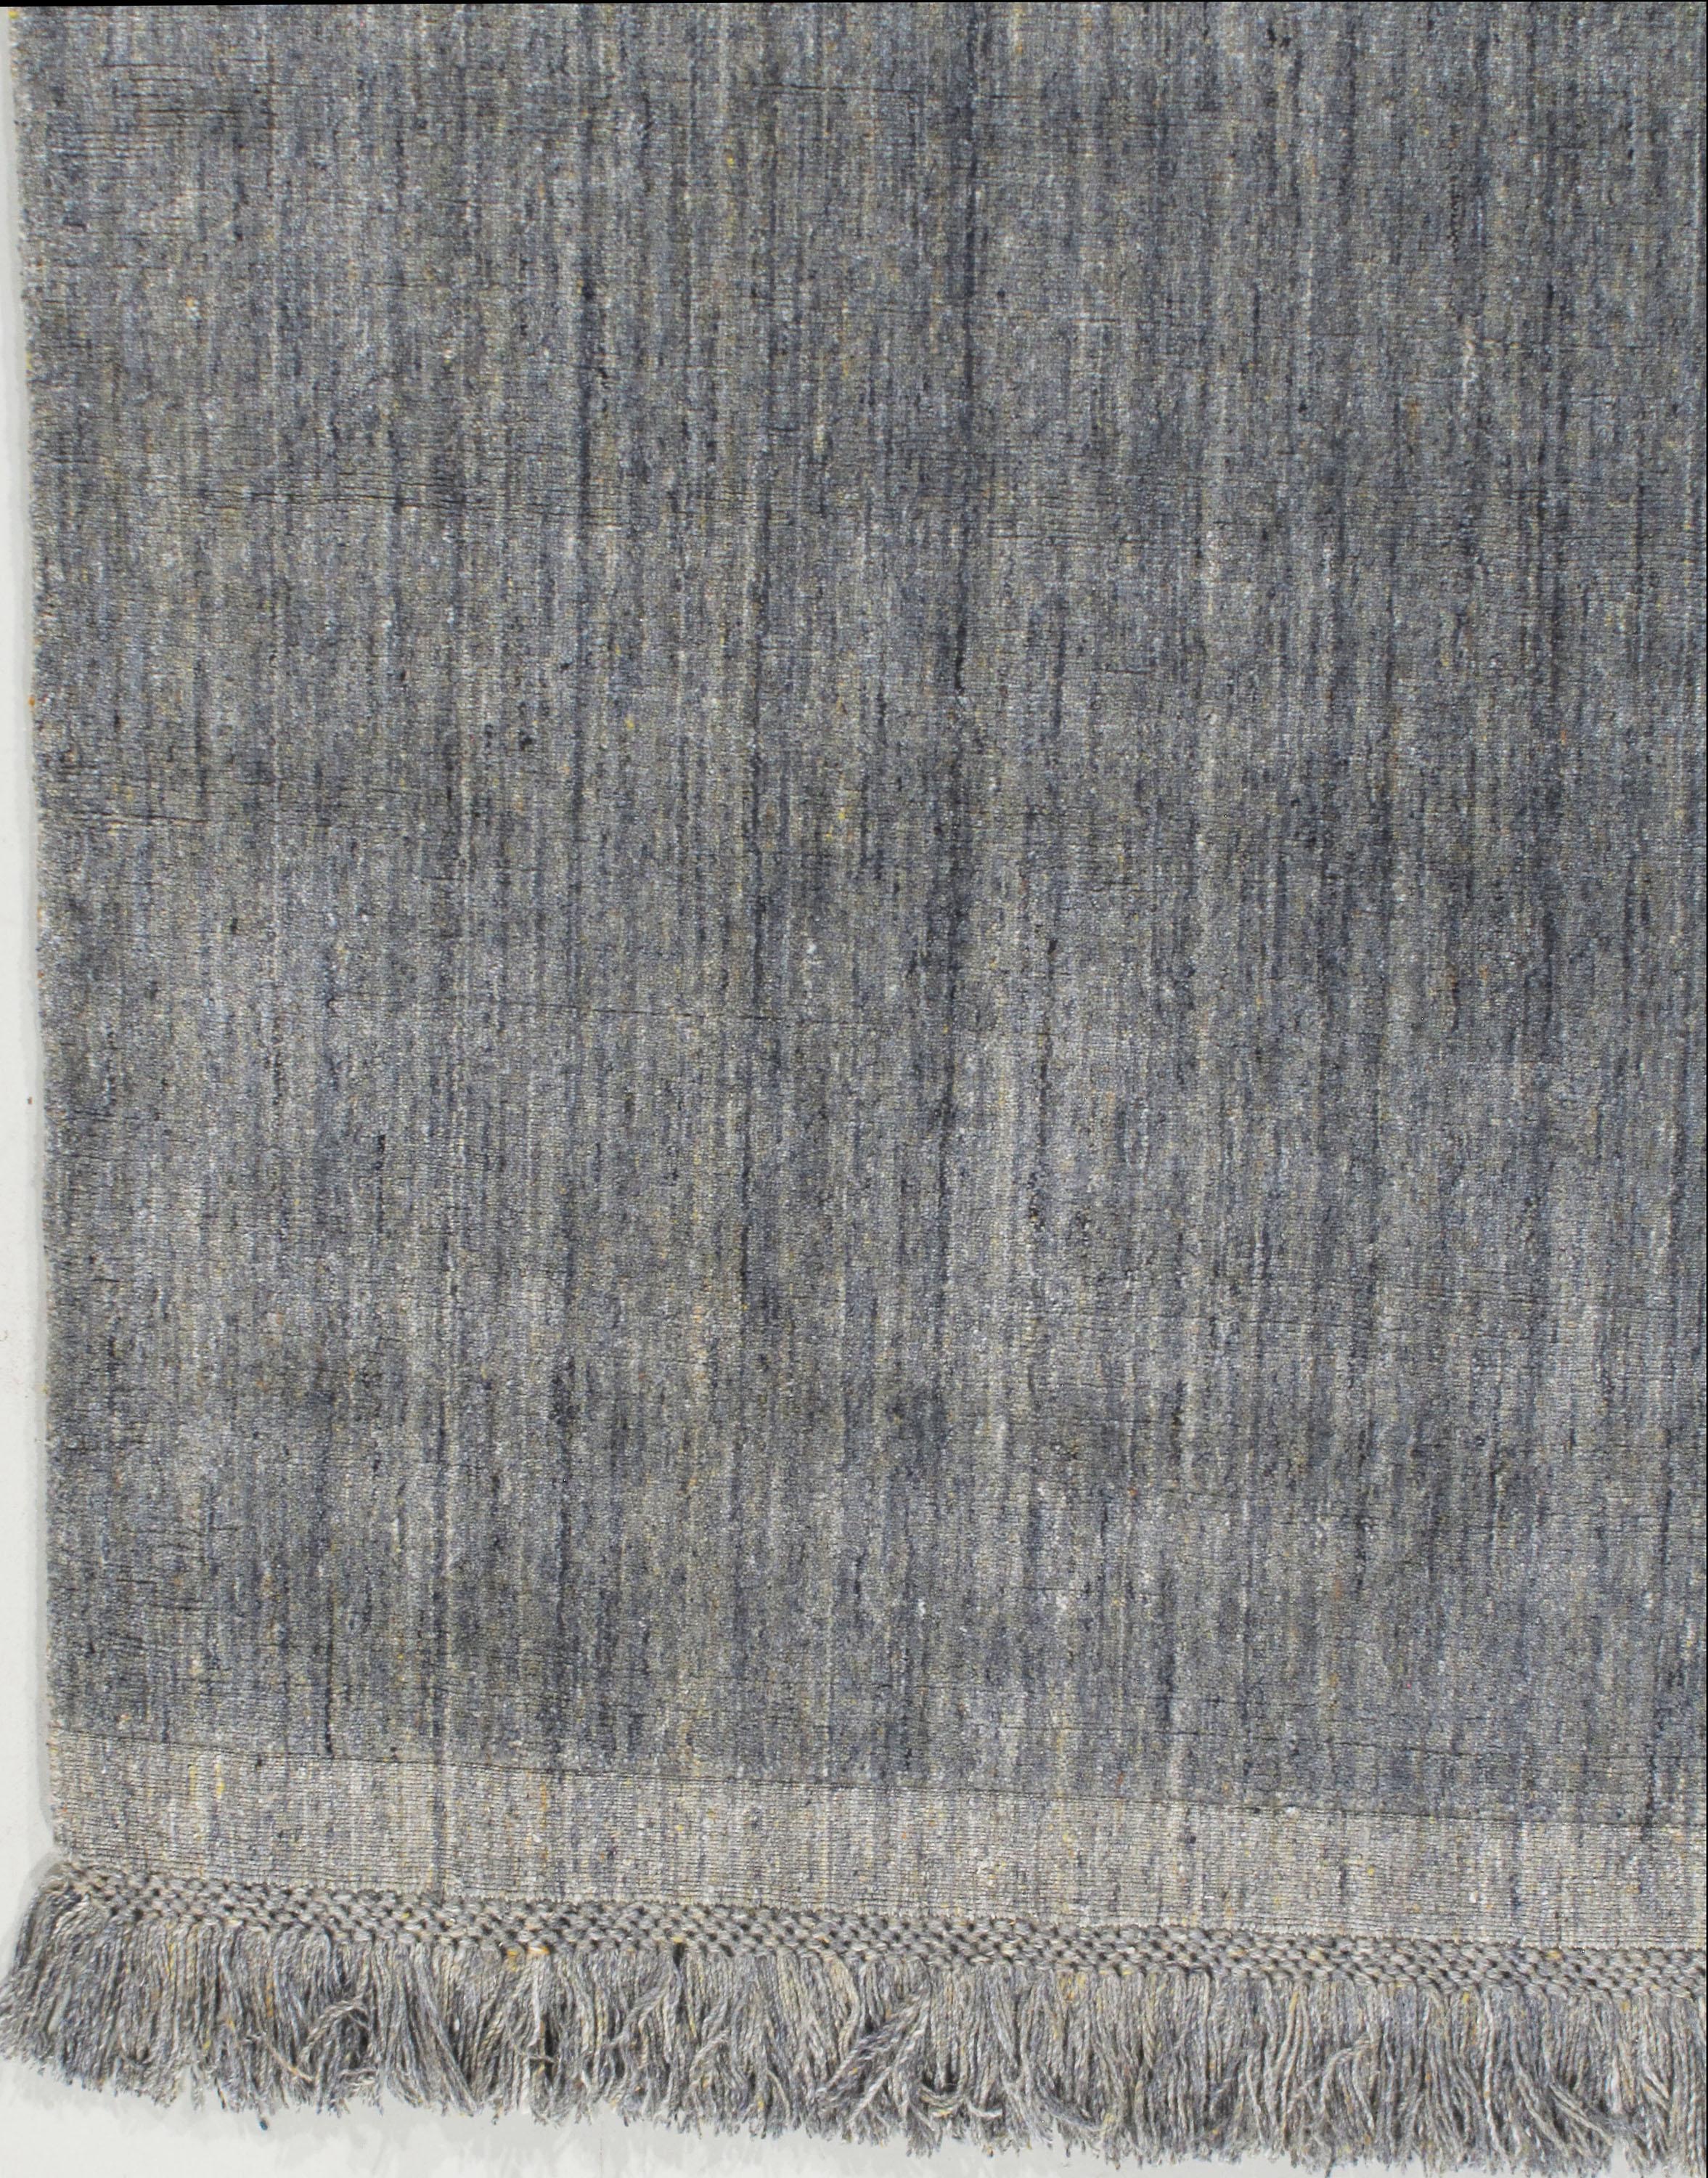 Contemporary Omni Area rug blue 4' x 6'. A hand knotted contemporary rug with a simple but attractive pattern.